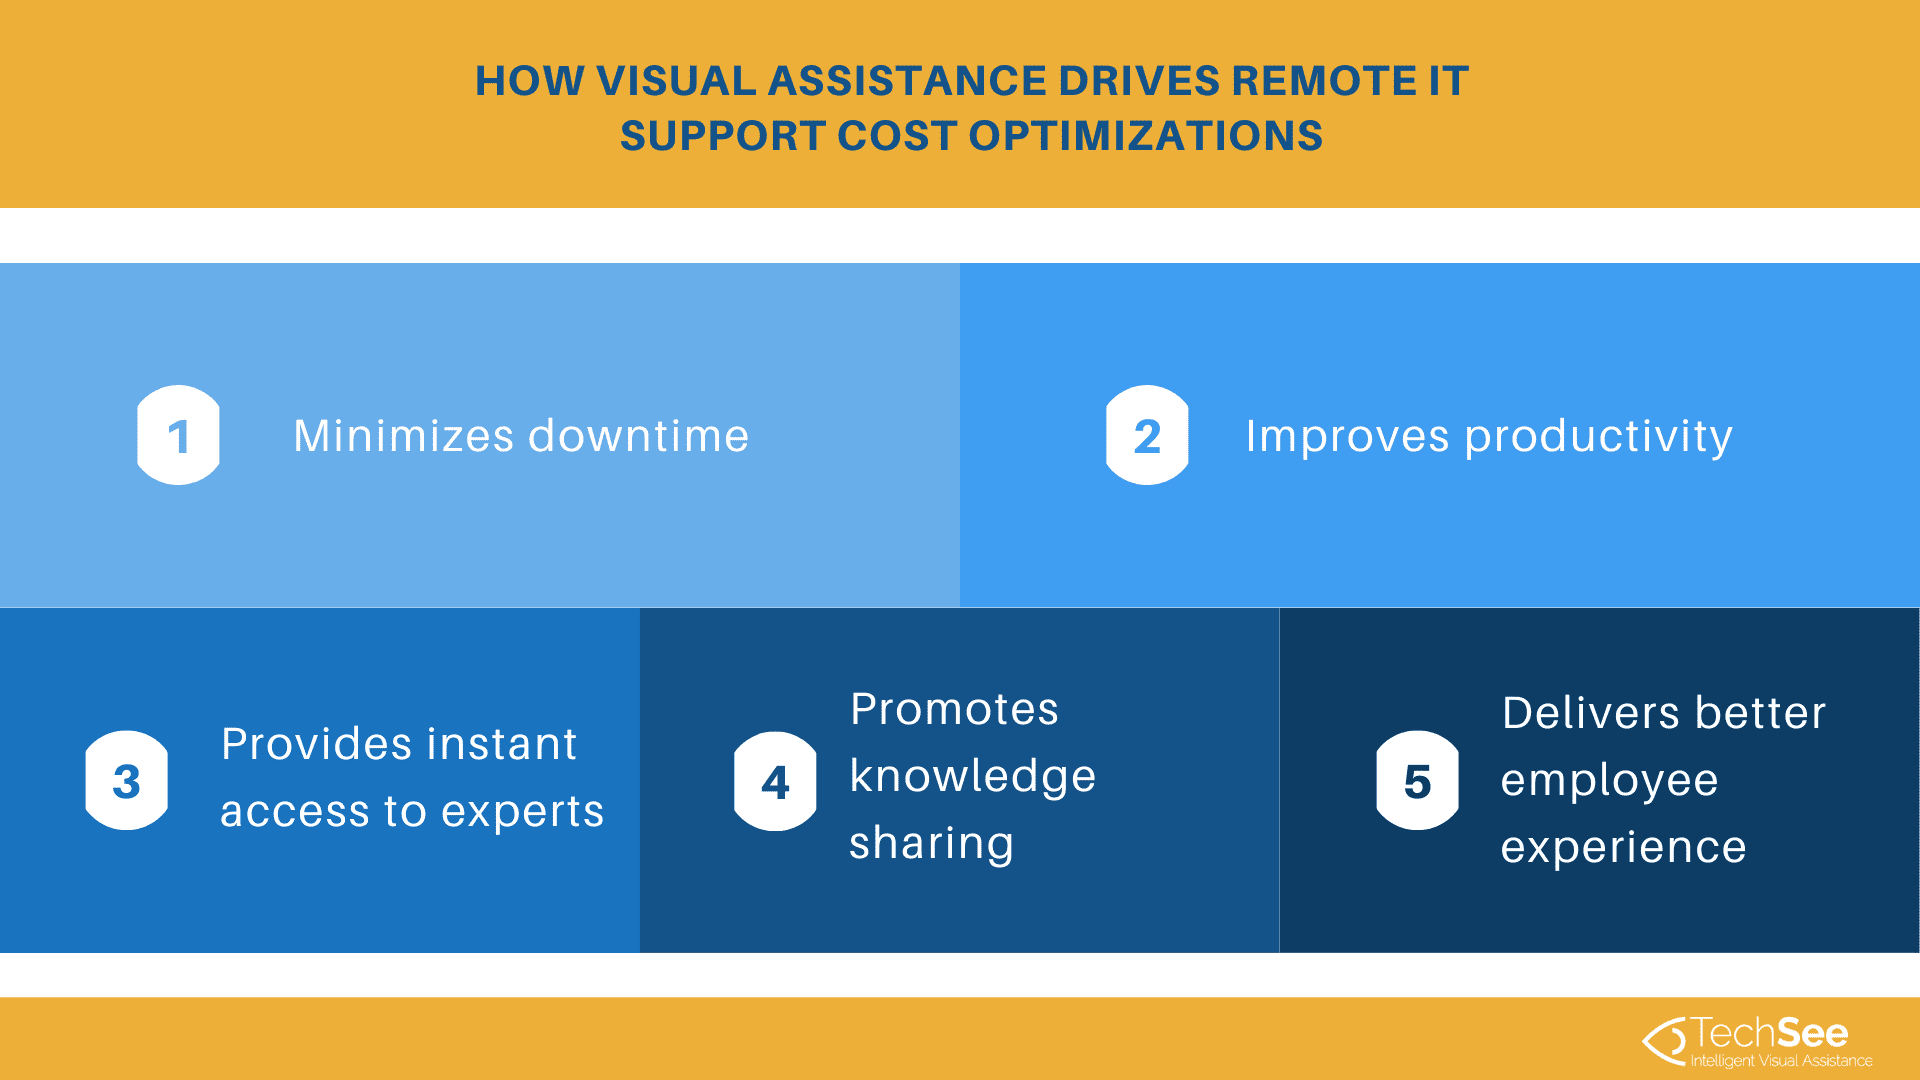 TechSees details 5 benefits of visual assistance for remote IT support cost optimization.